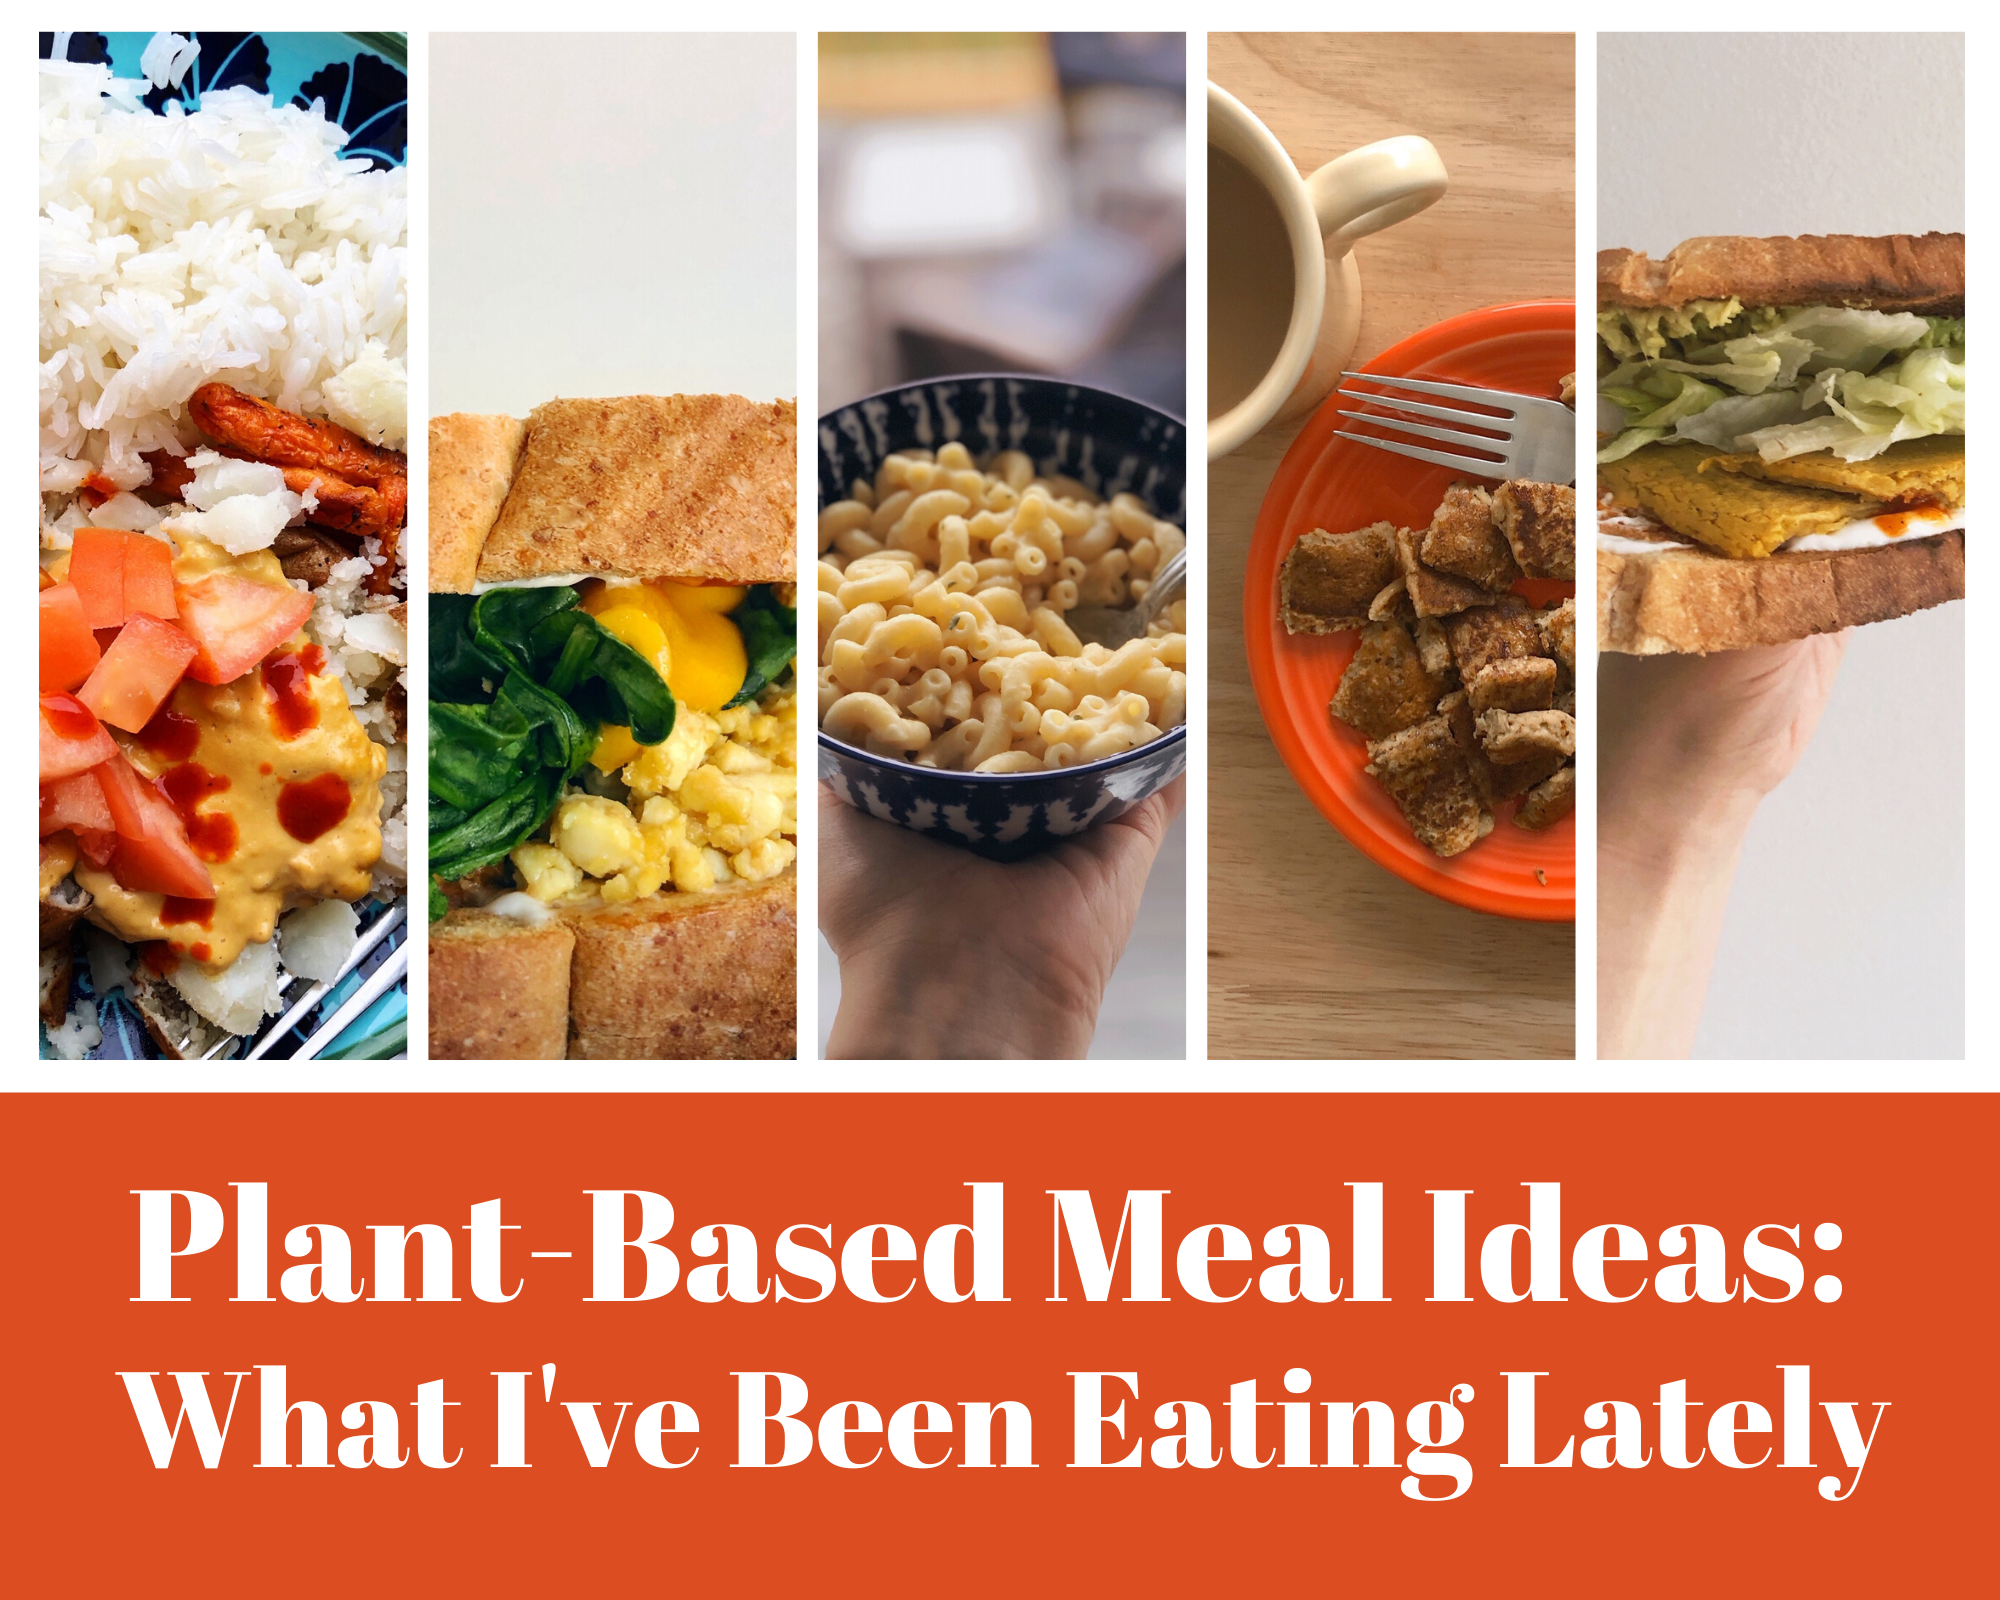 Plant-Based Meal Ideas: What I've Been Eating Lately